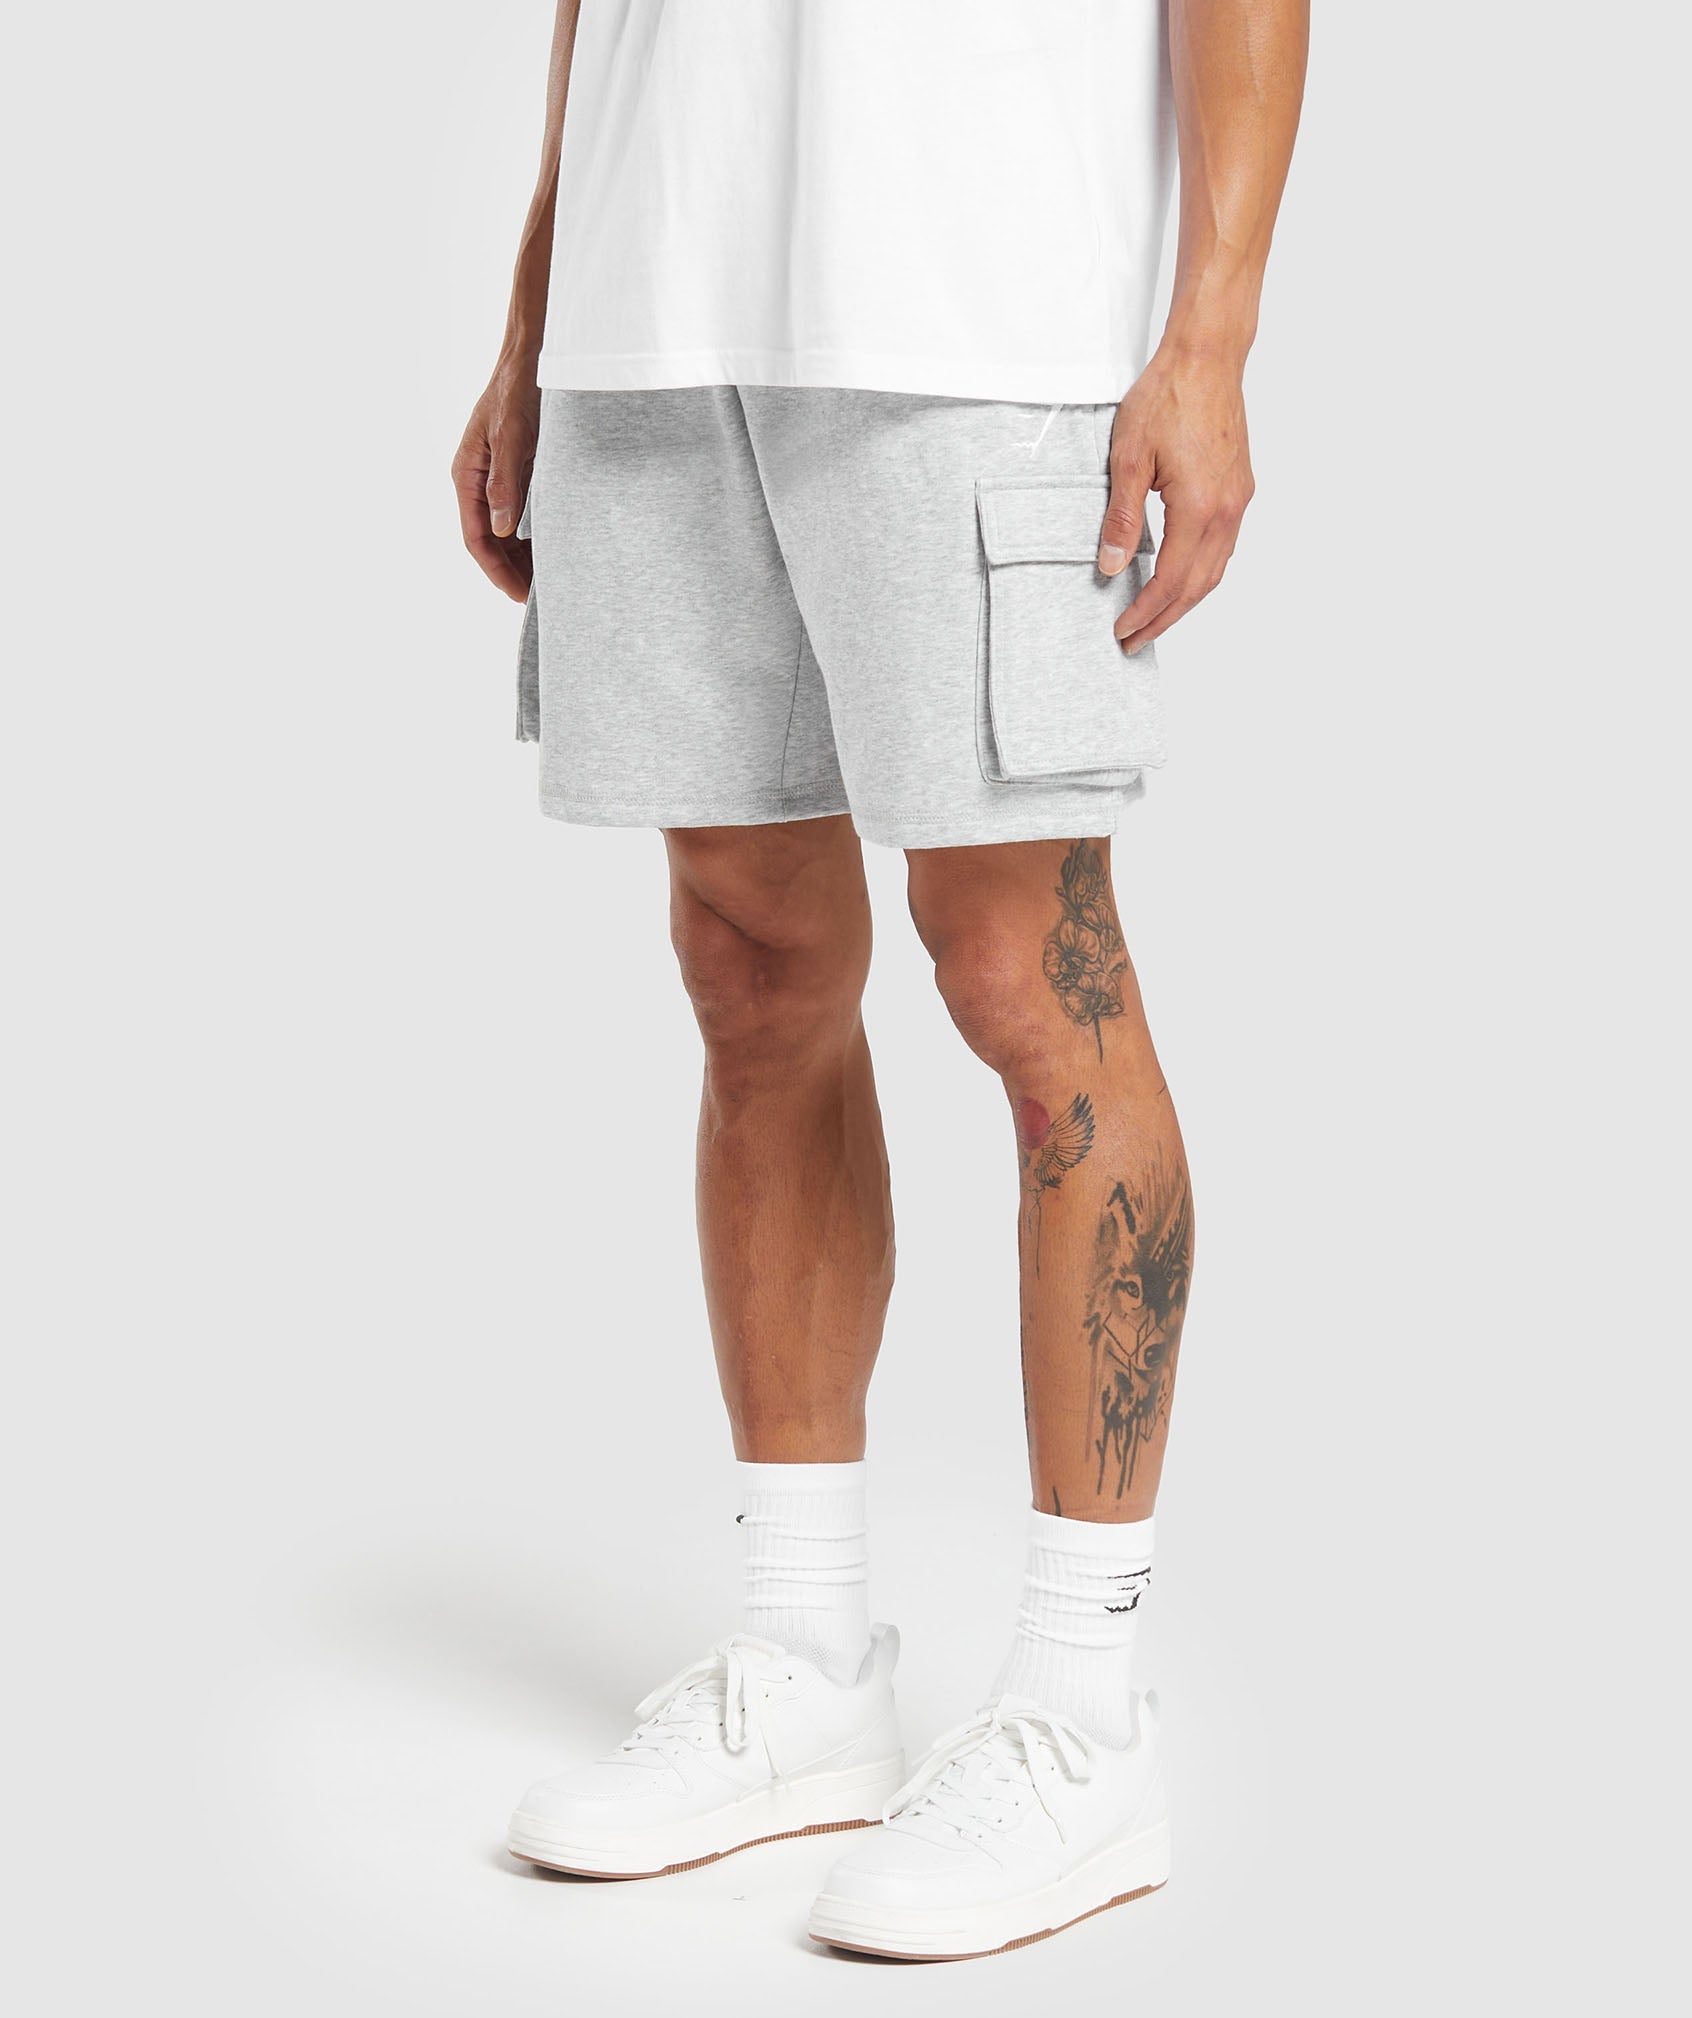 Crest Cargo Shorts in Light Grey Marl - view 3